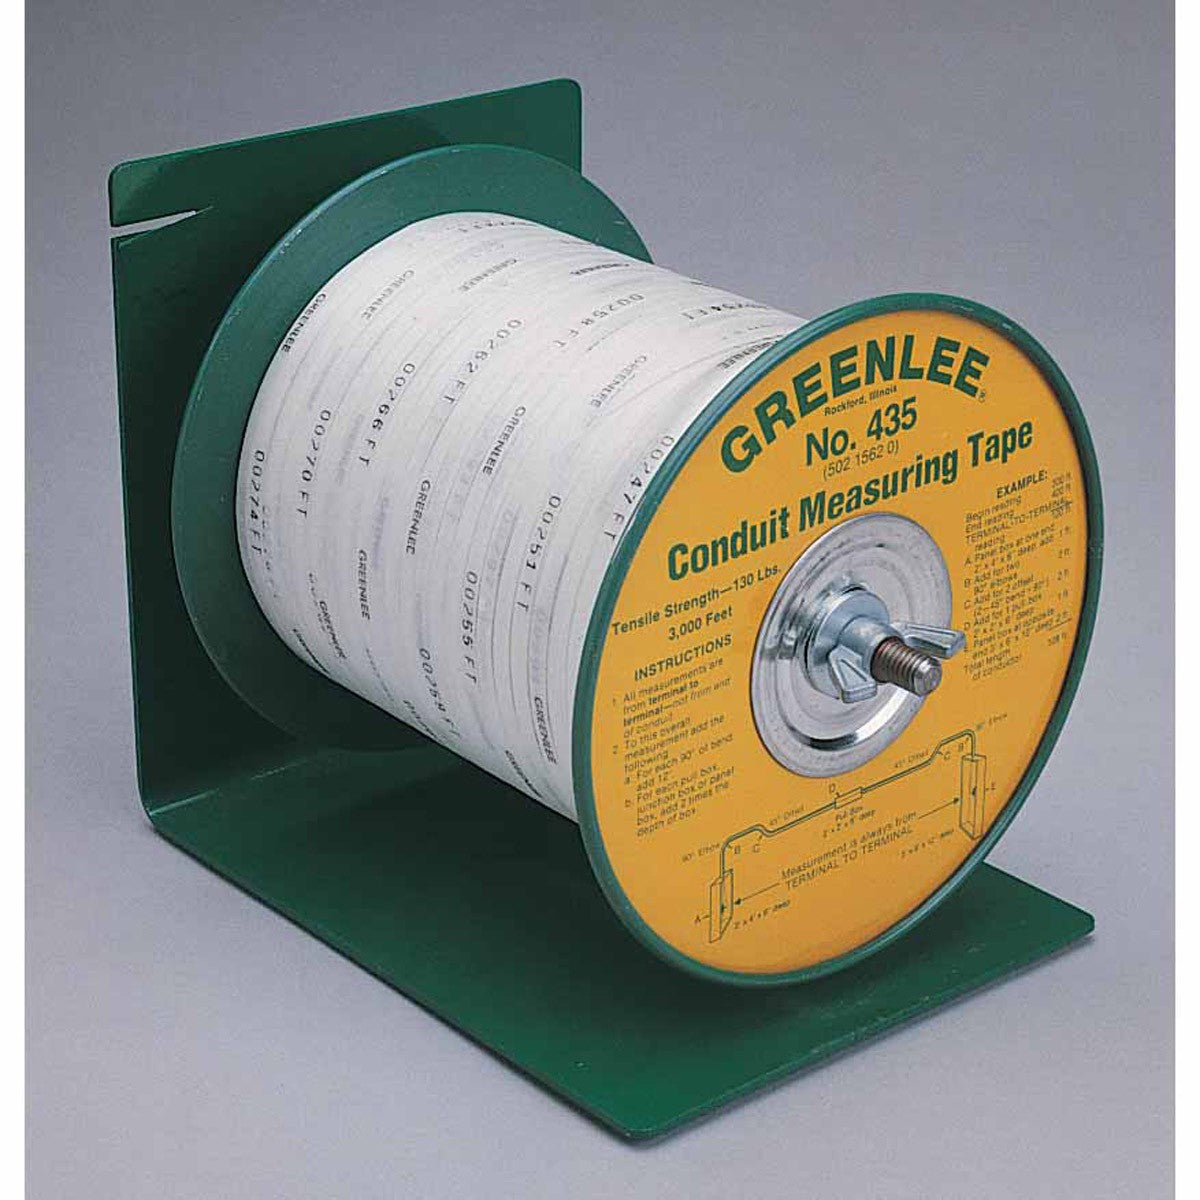 Greenlee 434 Pay-Out Dispenser for 435 Conduit Measuring Tape